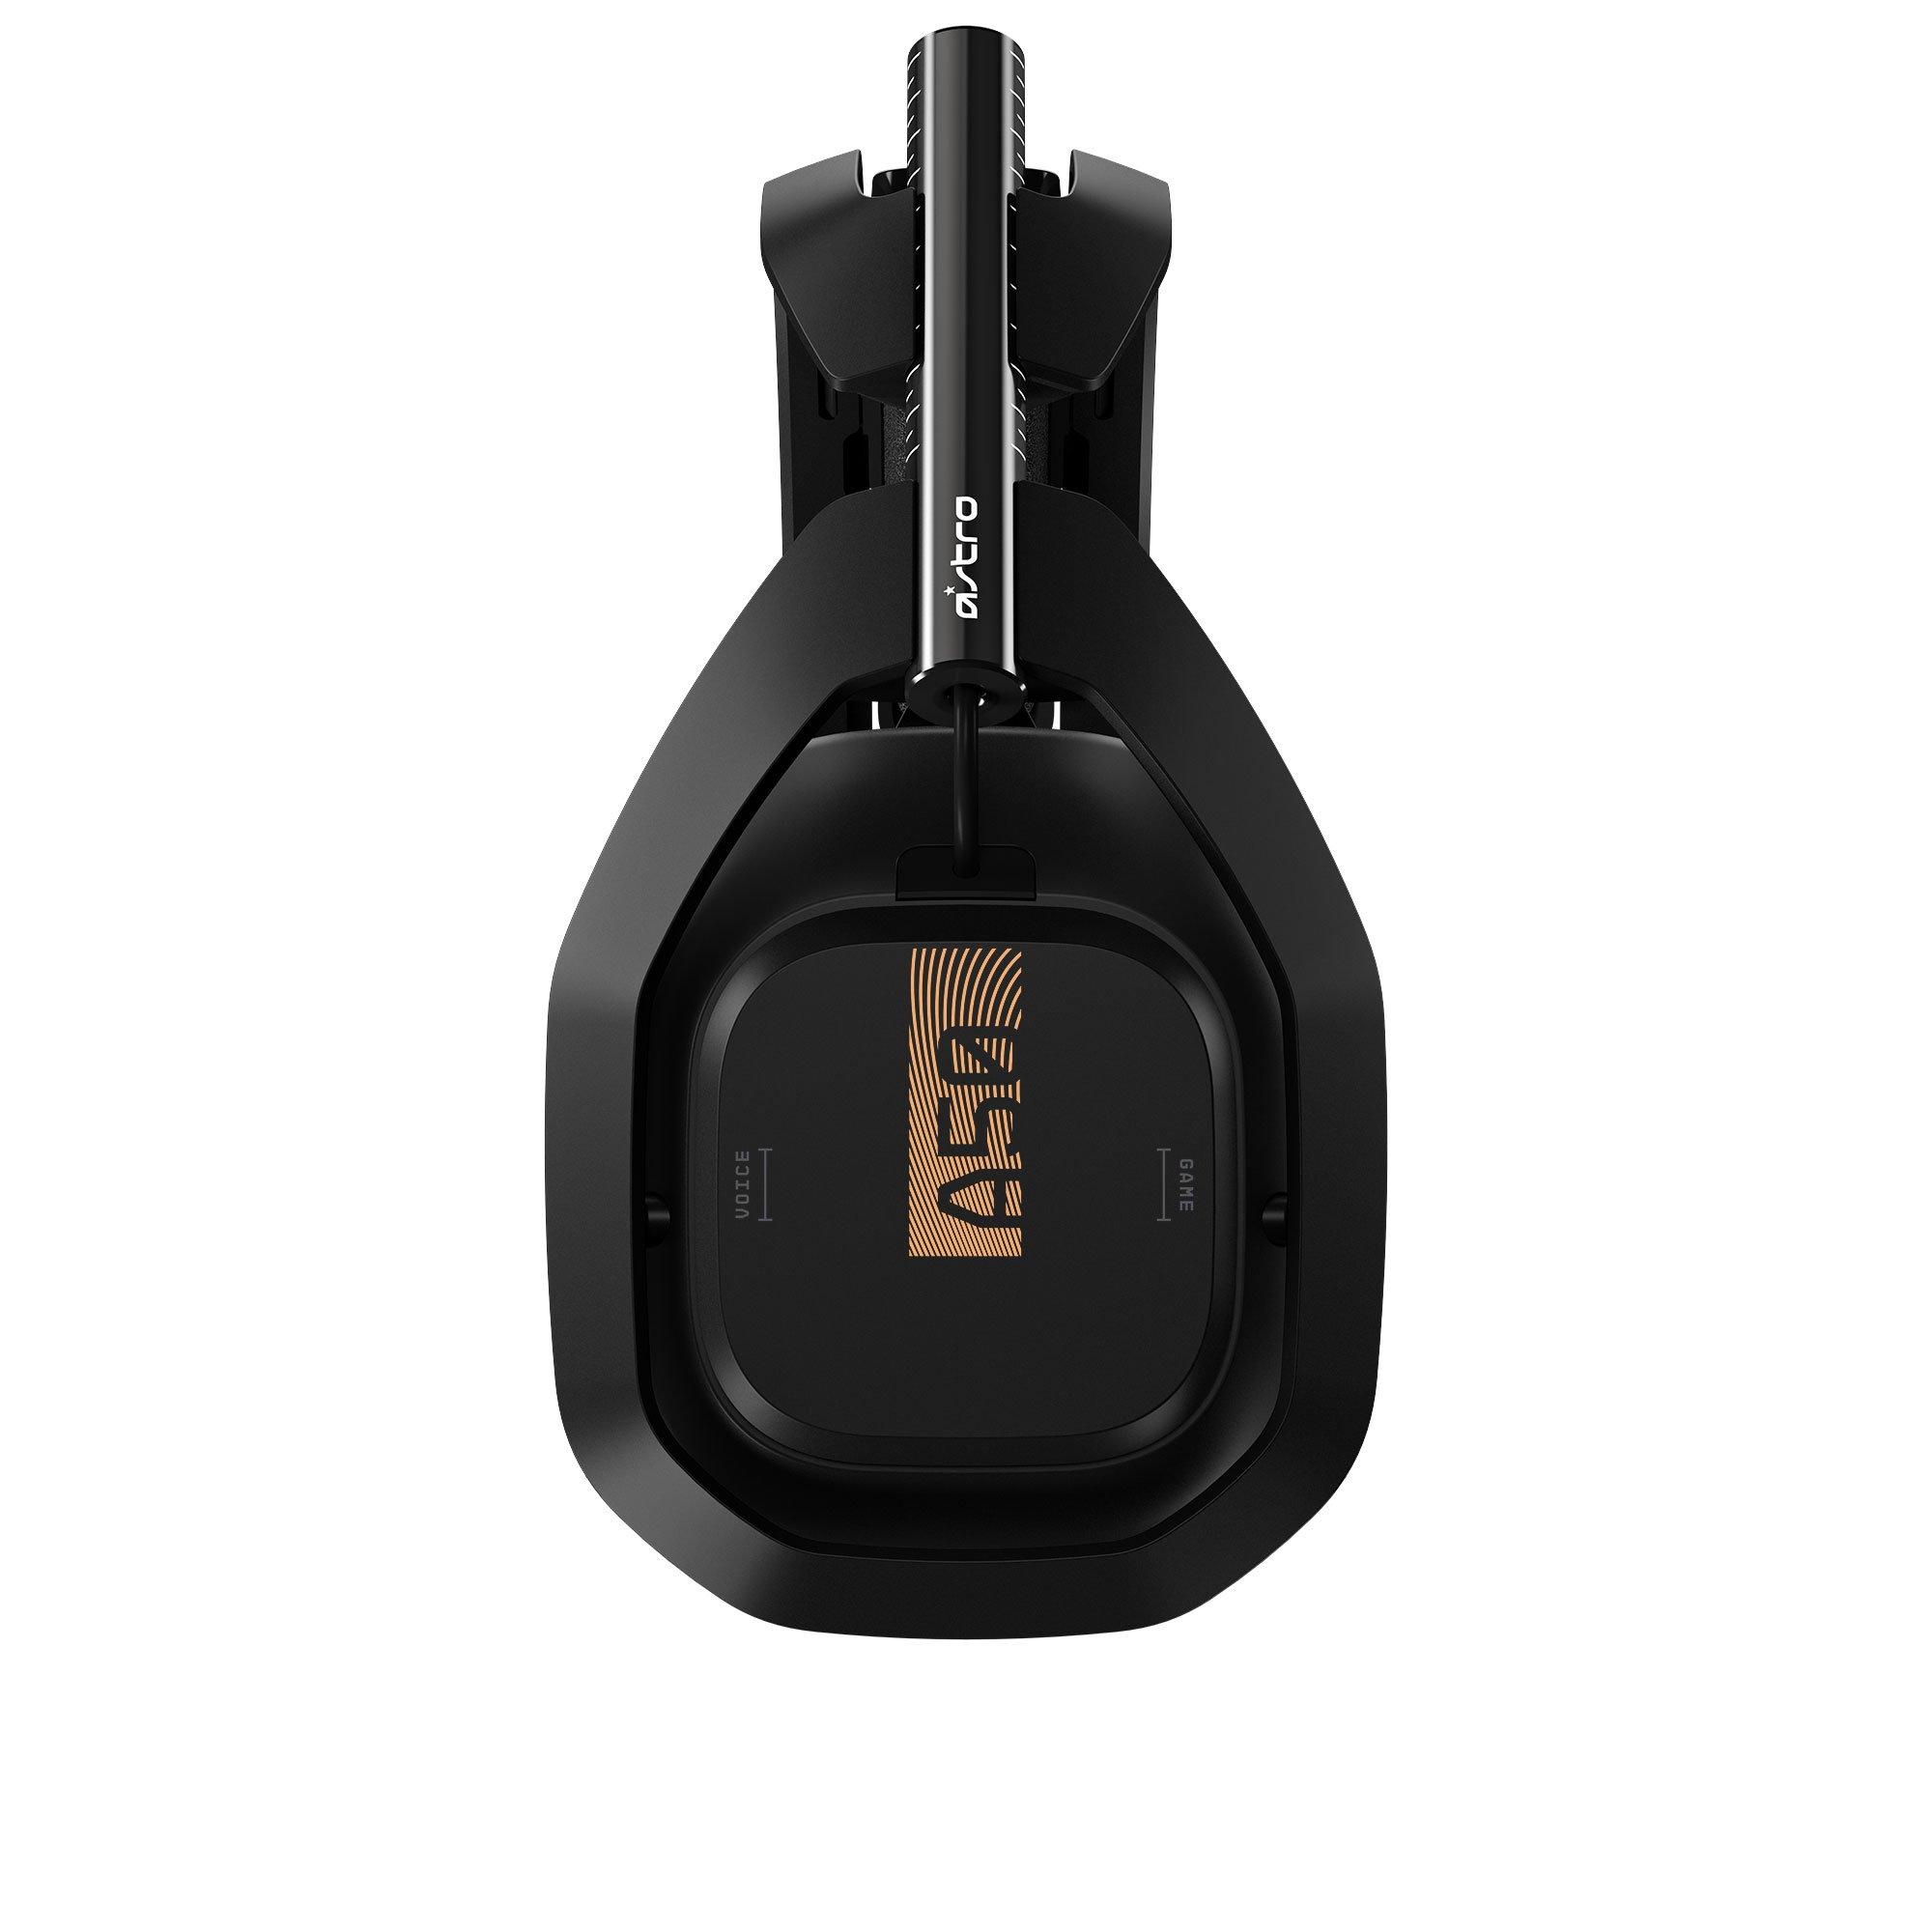 A50 wireless Astro gaming headset for Xbox or PC